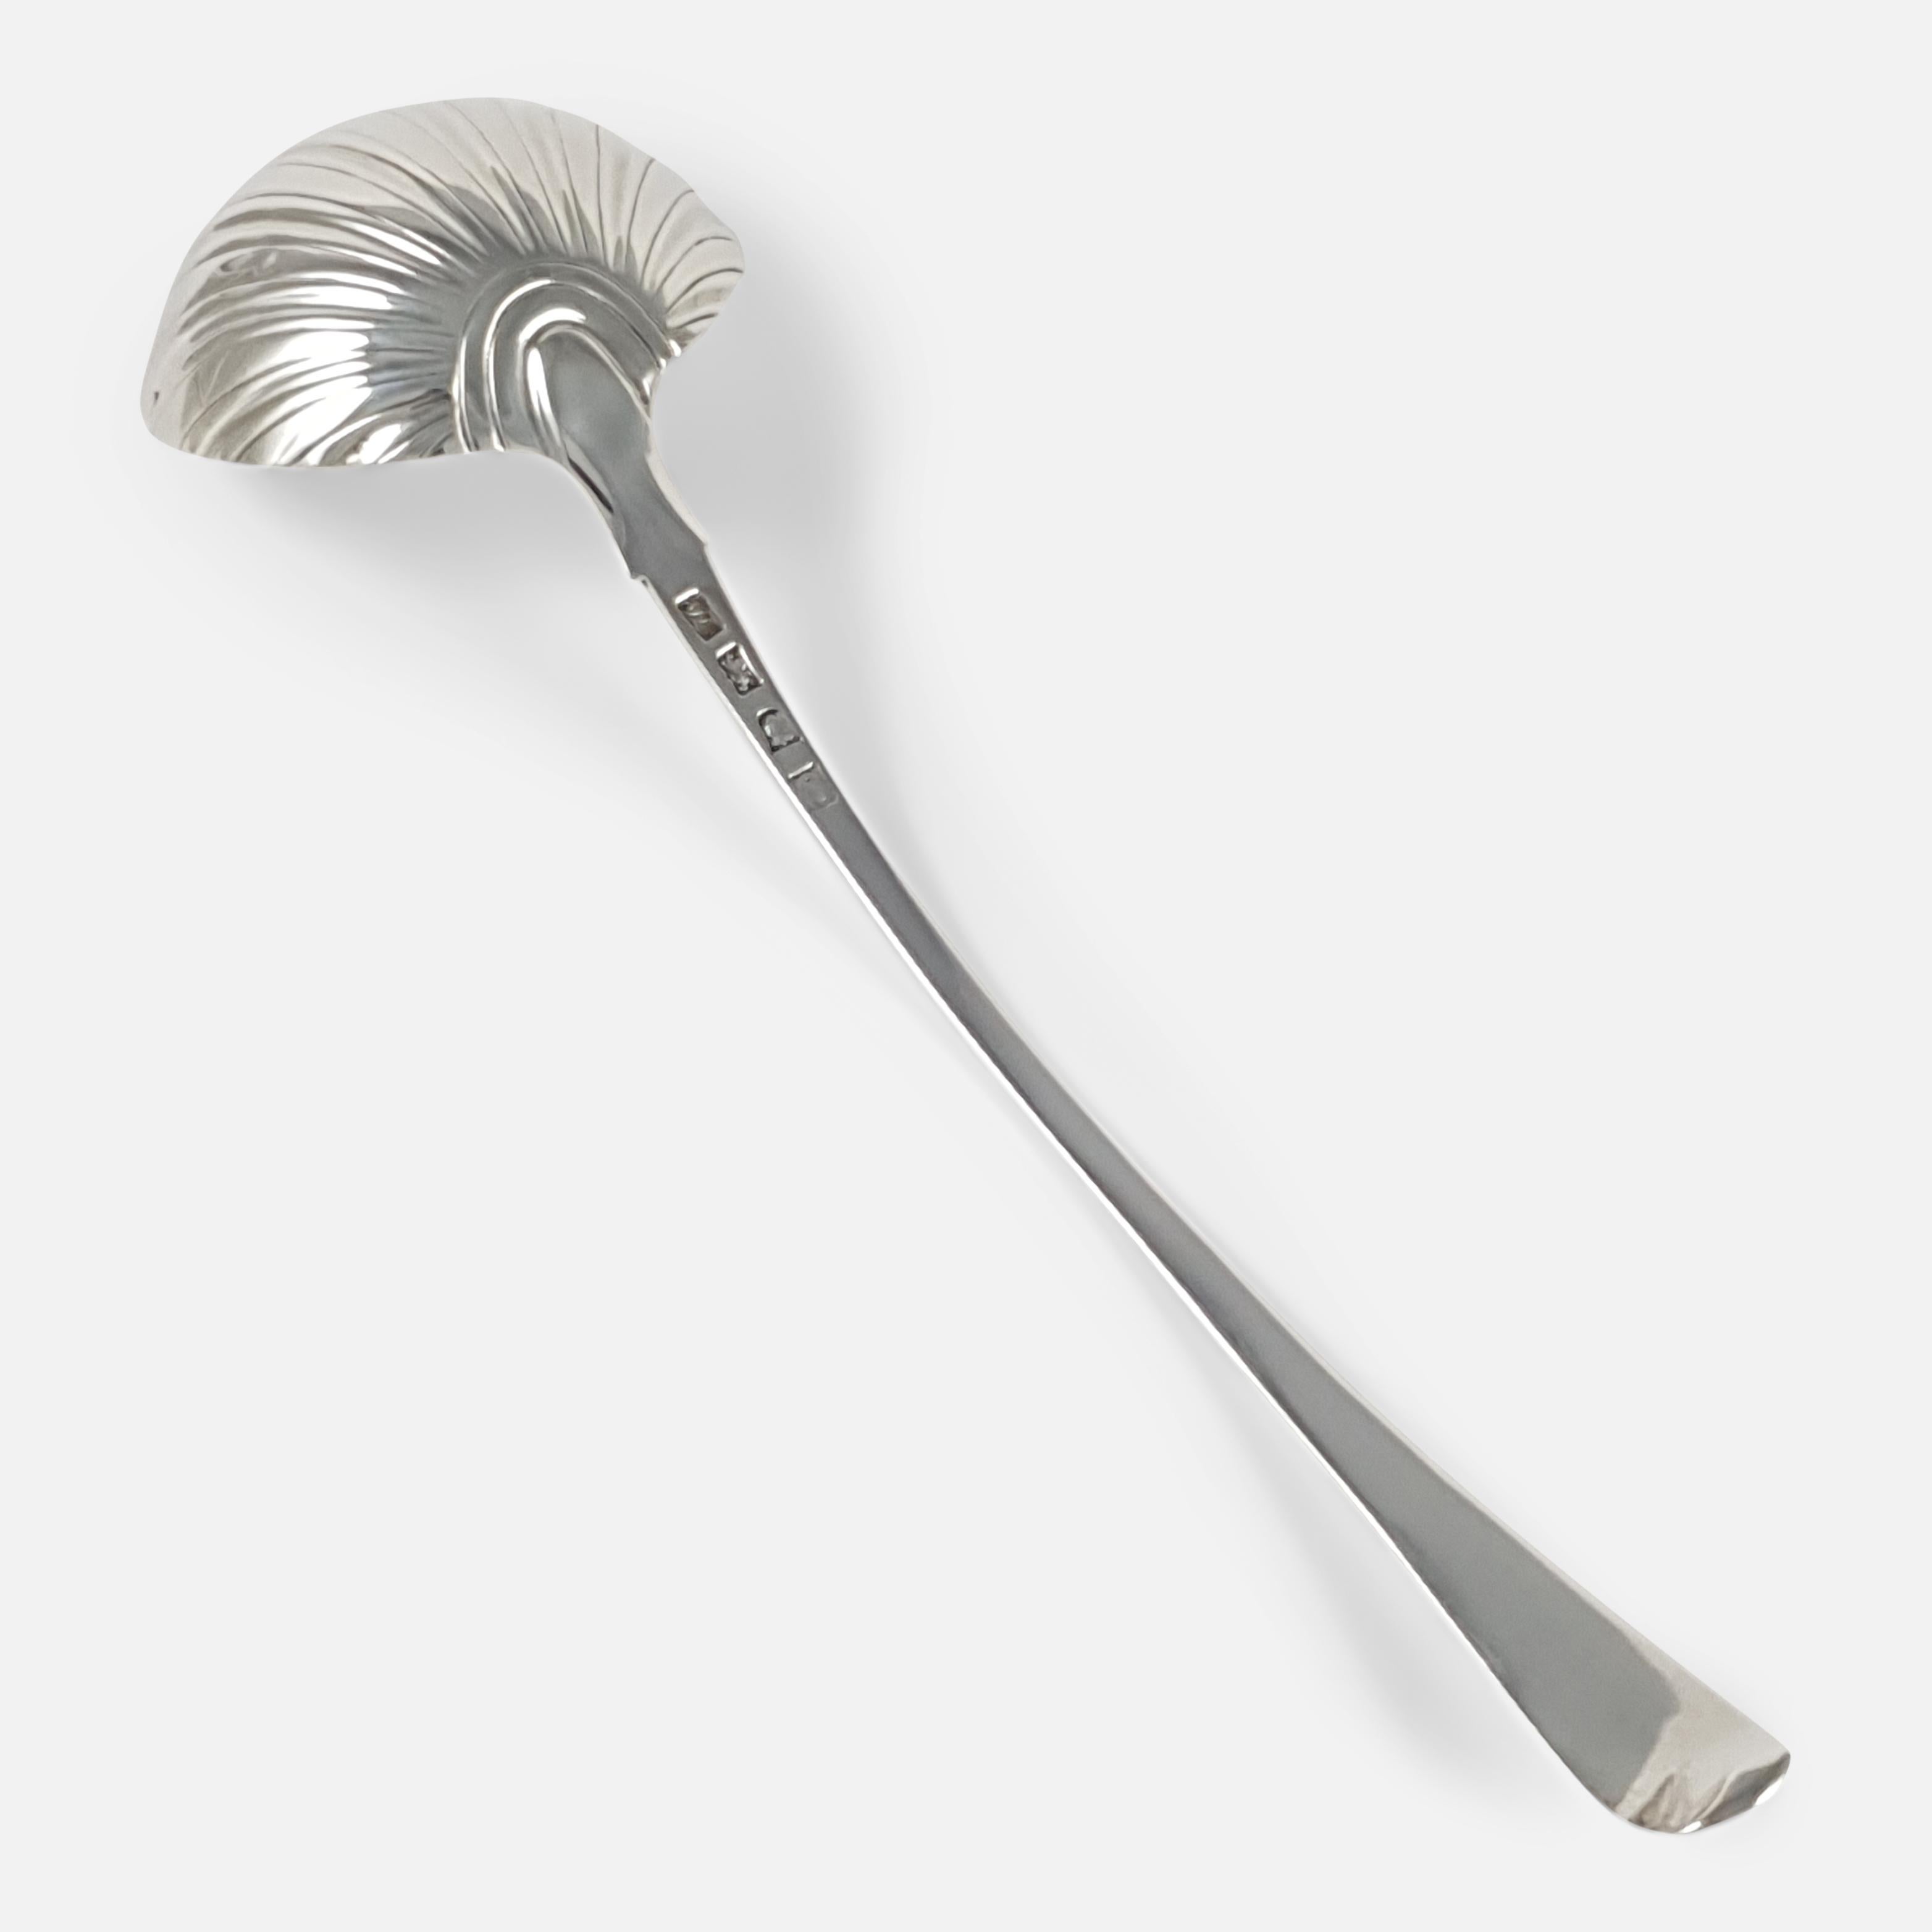 A George III silver Old English pattern soup ladle, with shell bowl by the silversmith John Lampfert, London 1771.

Date: - 1771.

Period: - 18th century.

Engraving: - None.

Maker: - John Lampfert.

Measurement: - The ladle measures 28.5cm and the